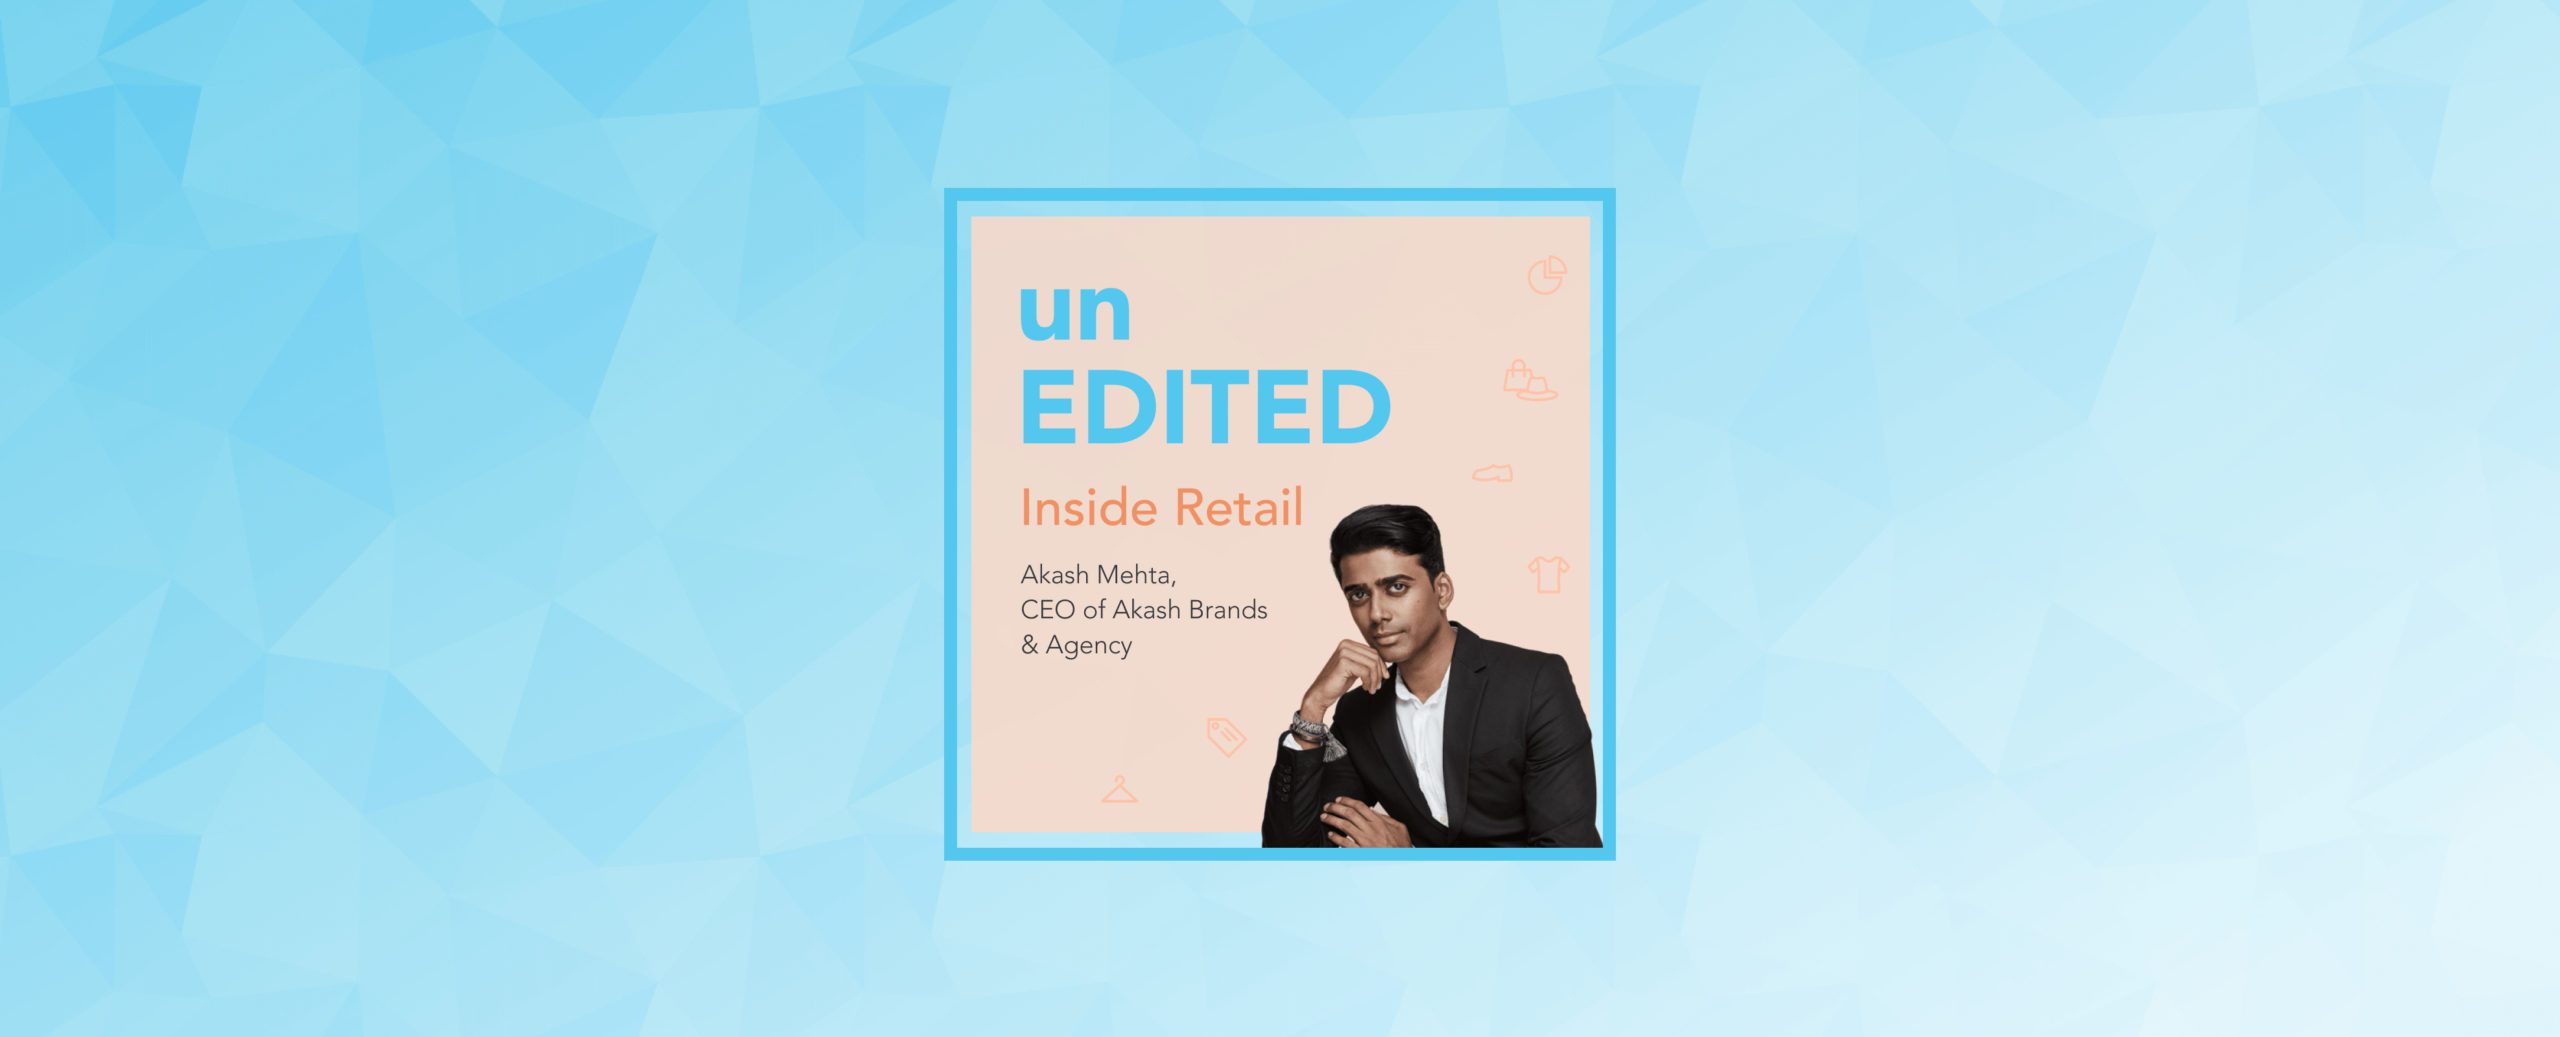 Podcast EP.13: What is the effectiveness of influencer marketing? Ft. Akash Mehta, CEO of Akash Brands & Agency | EDITED